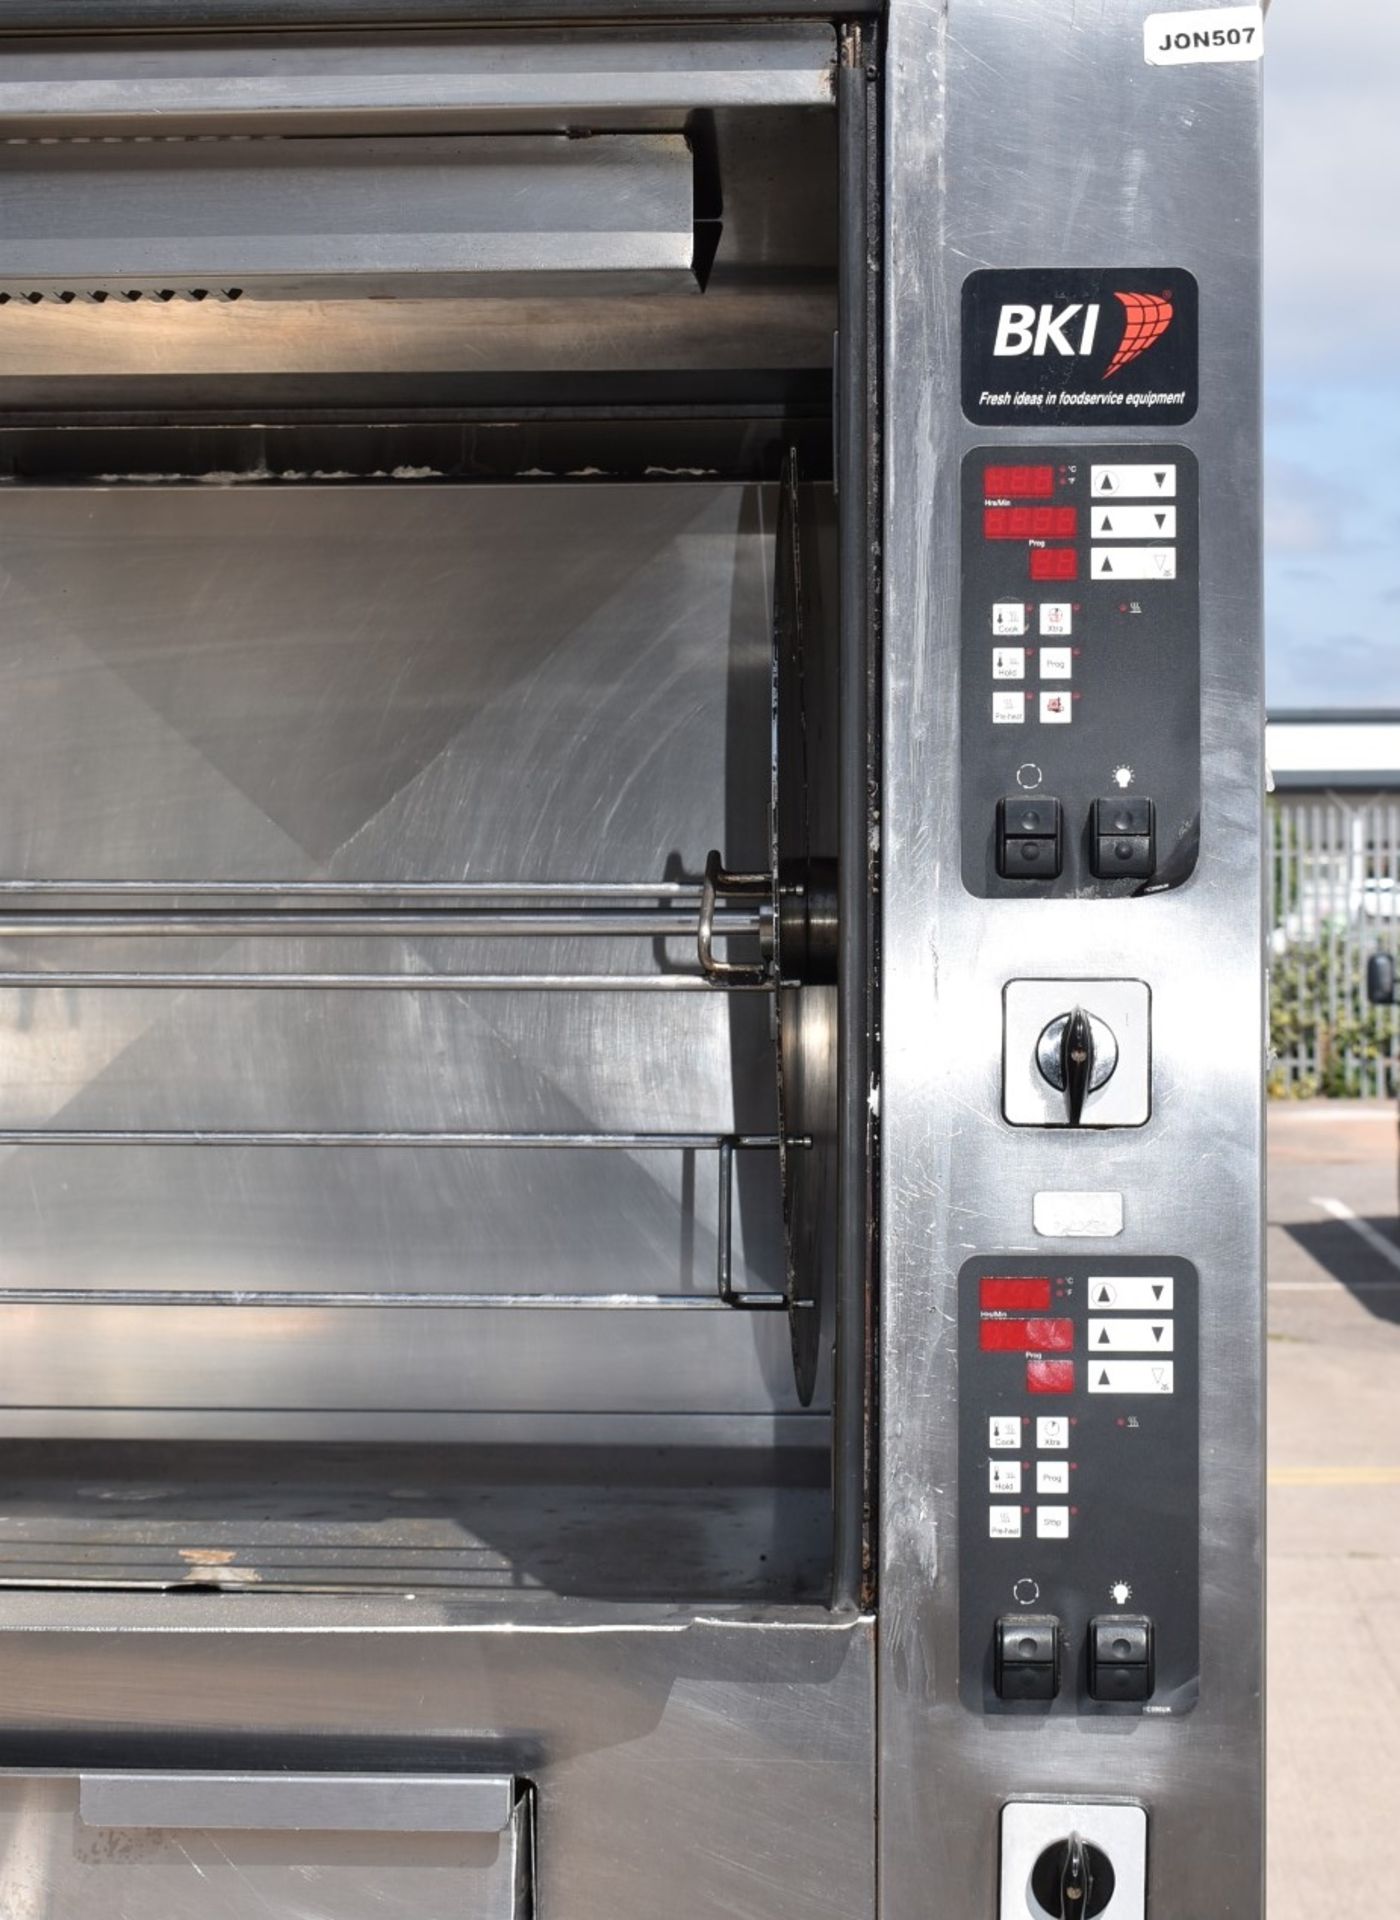 1 x BKI BBQ King Commercial Double Rotisserie Chicken Oven With Stand - Type VGUK16 - 3 Phase - Image 16 of 21